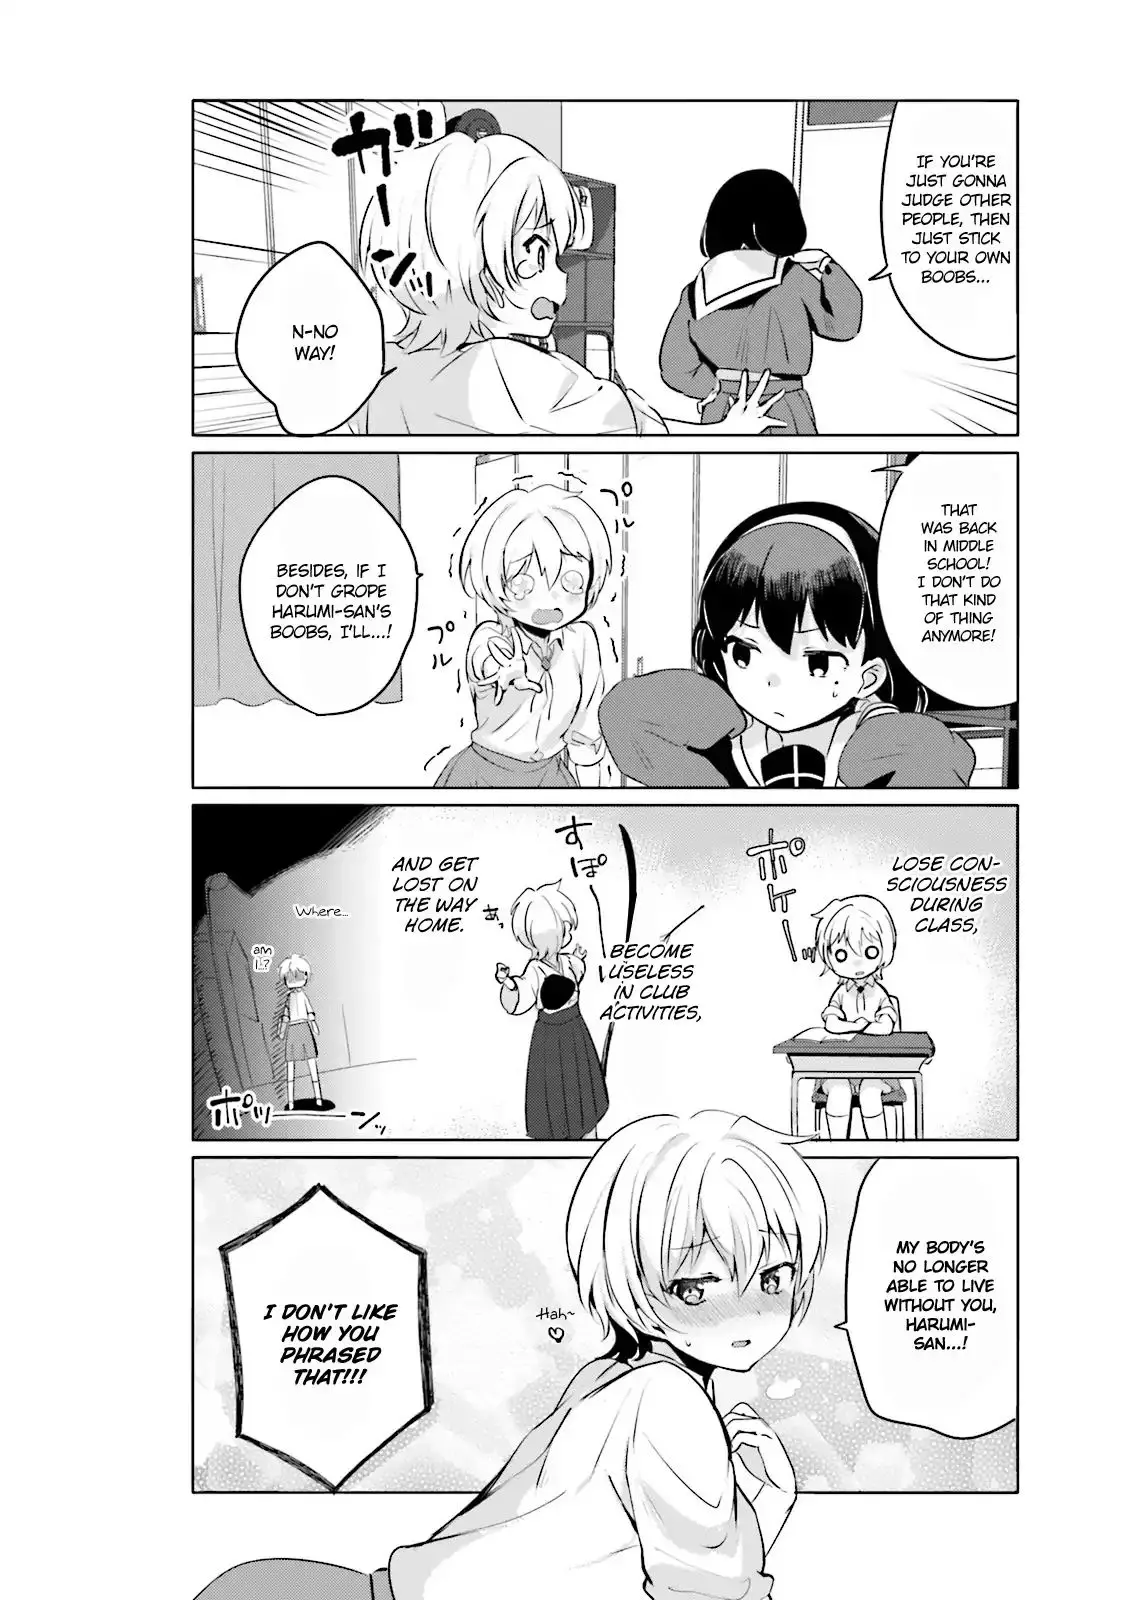 I Like Oppai Best In The World! - 1 page 6